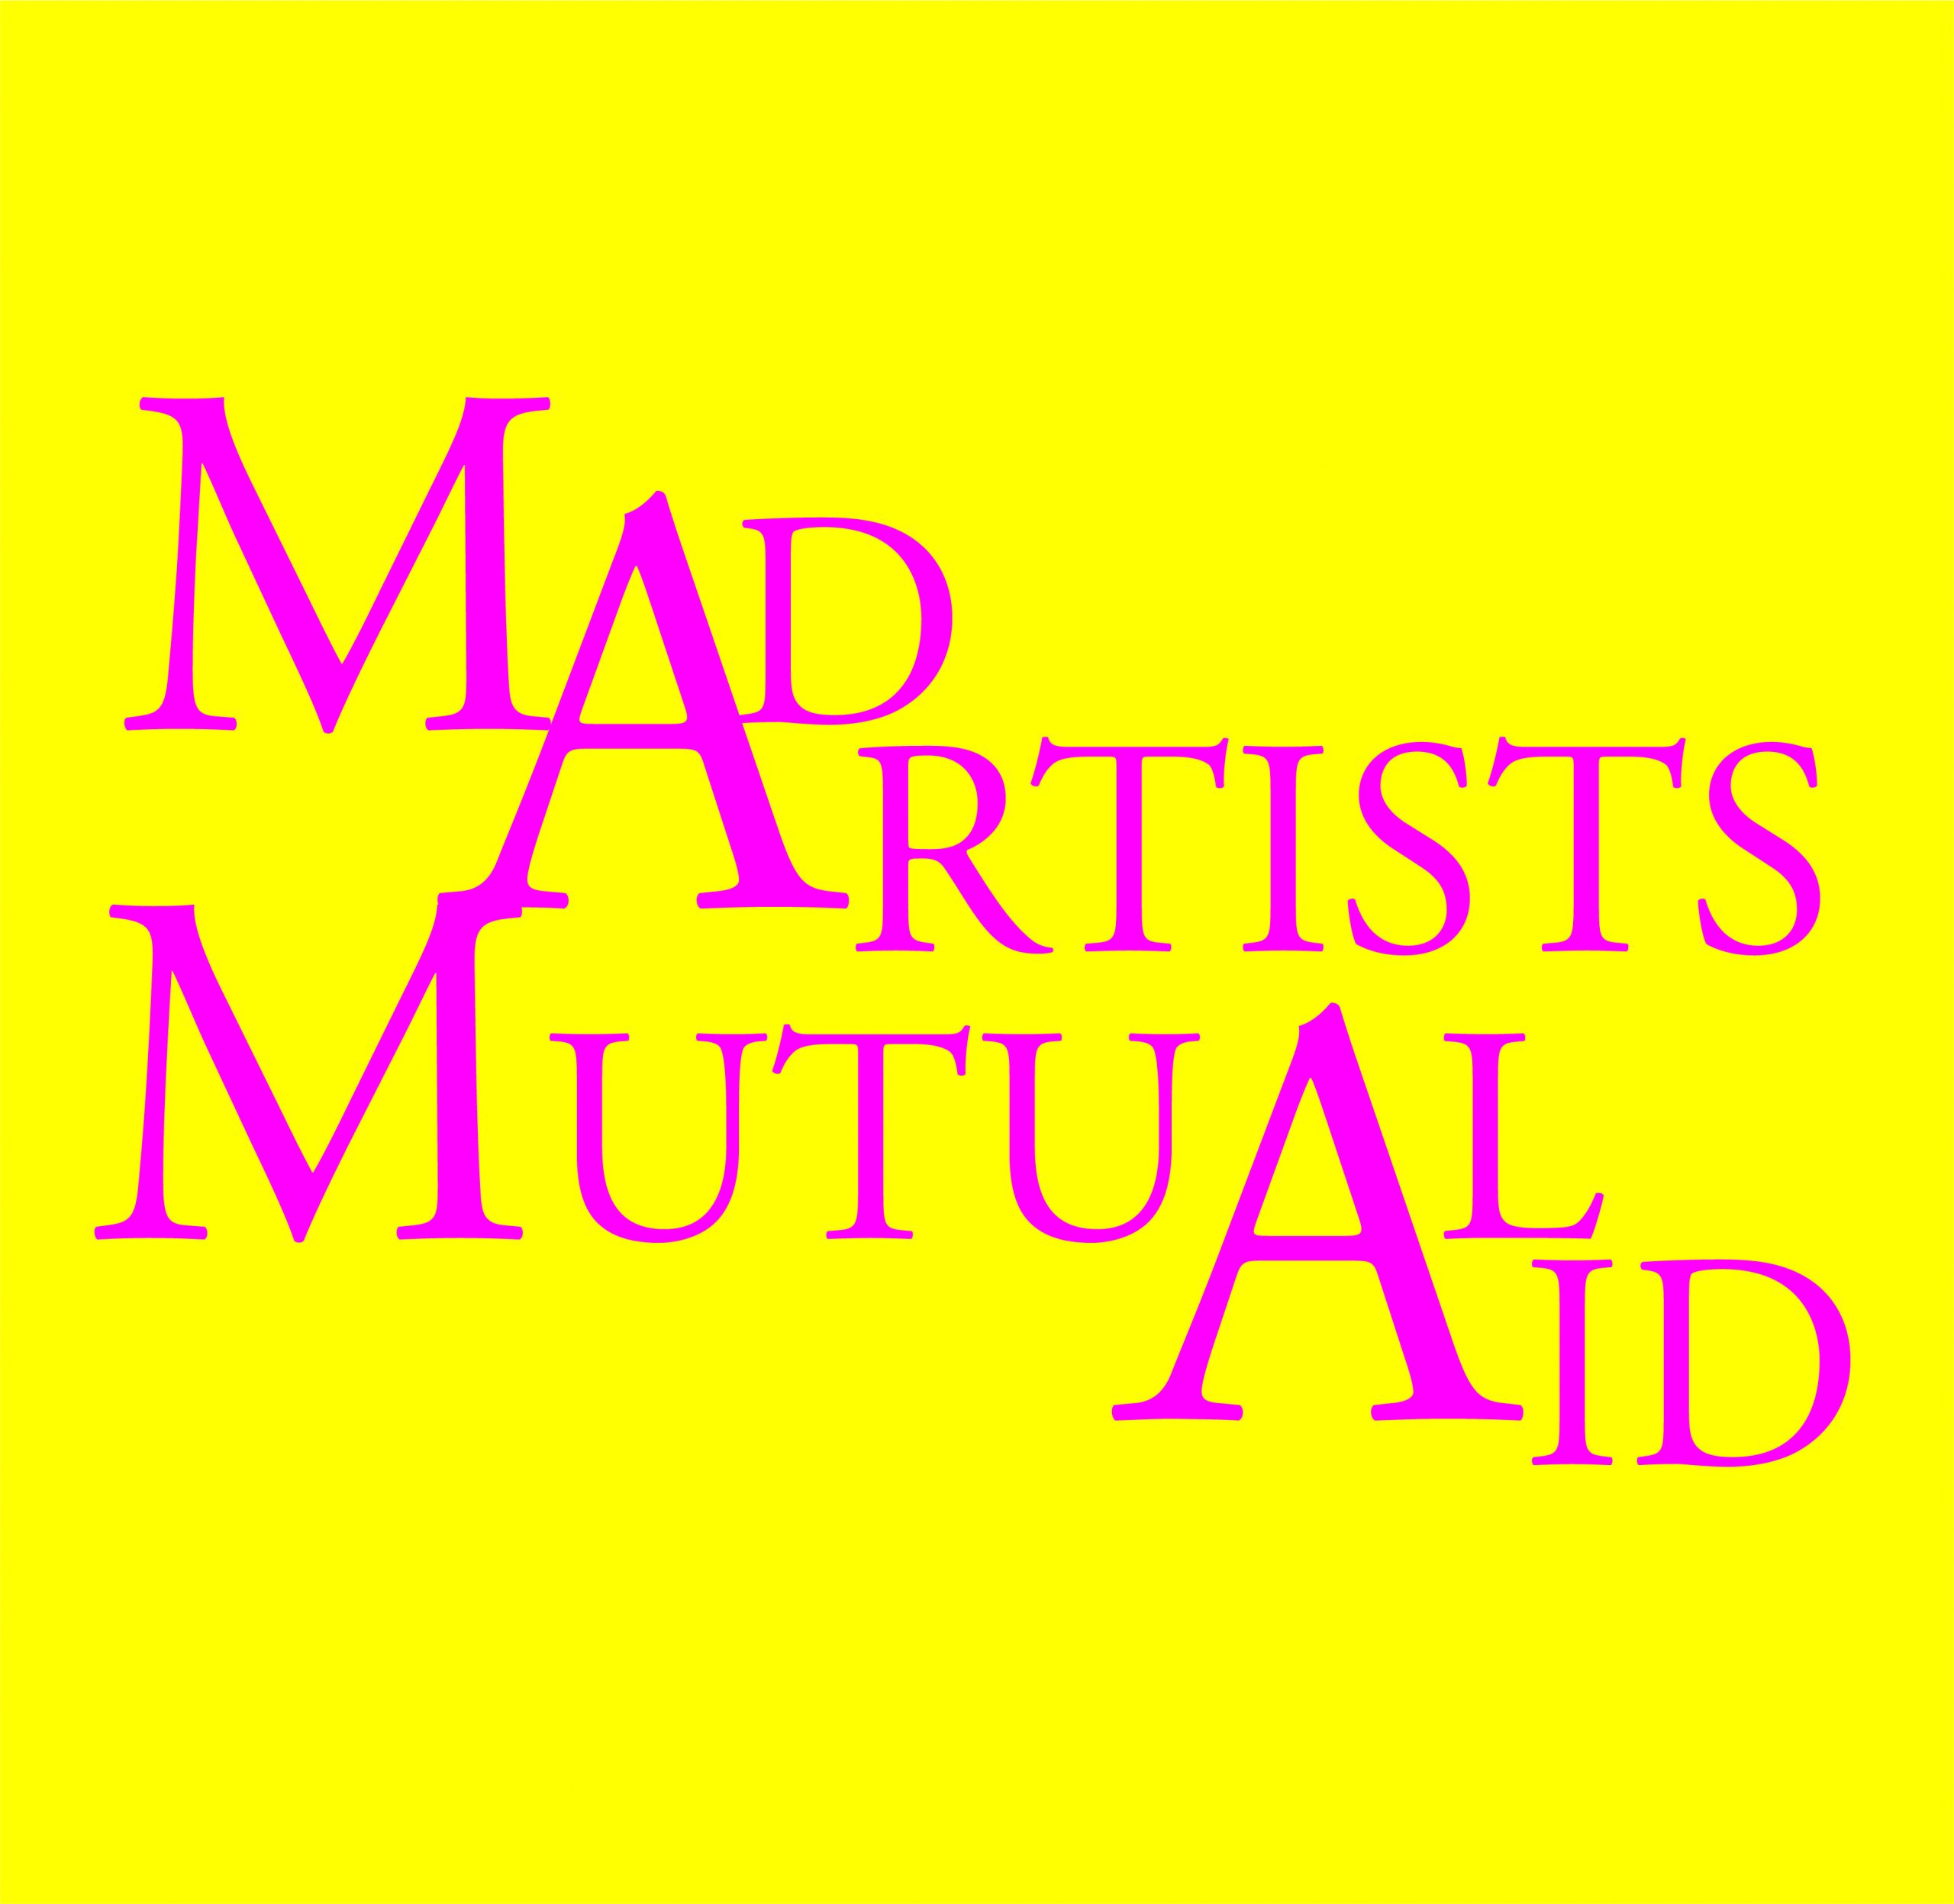 Yellow square with Mad Artists Mutual Aid written in pink